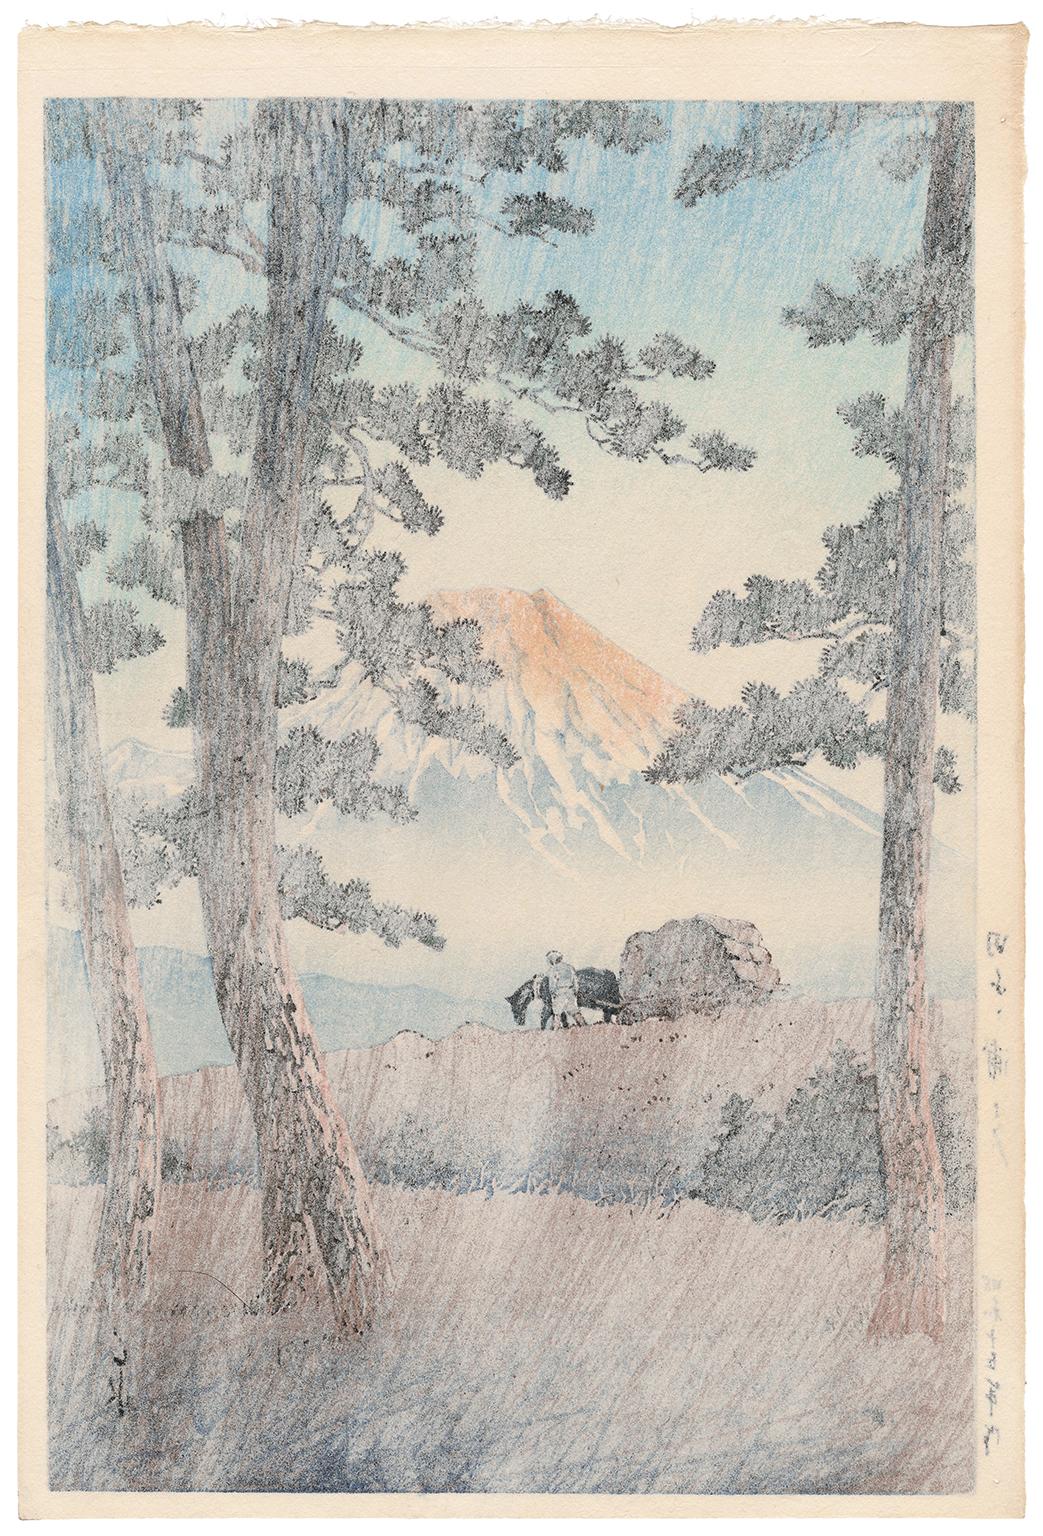 Mount Fuji Seen from Tagonoura, Evening — lifetime impression - Print by Kawase Hasui